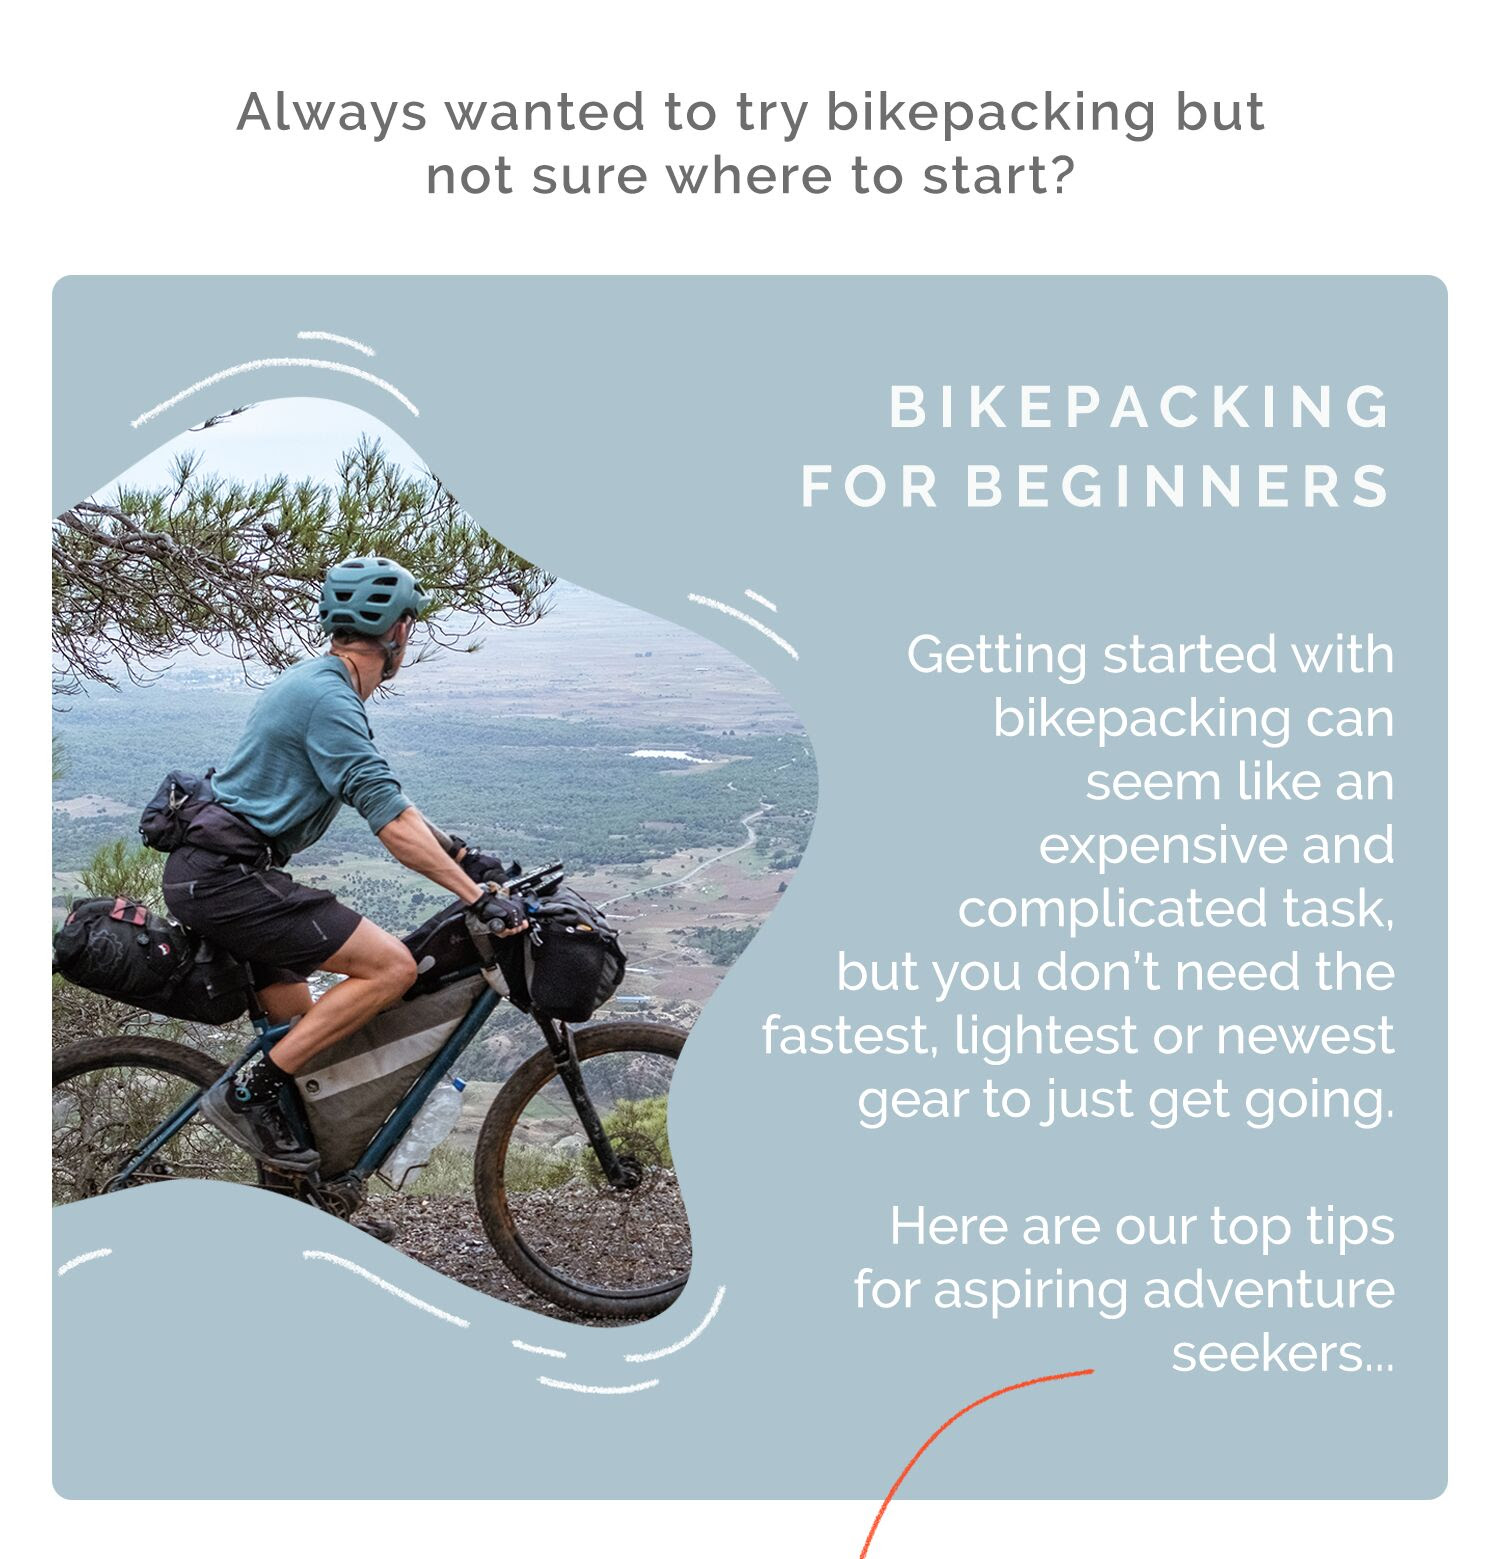 Always wanted to try bikepacking but not sure where to start?